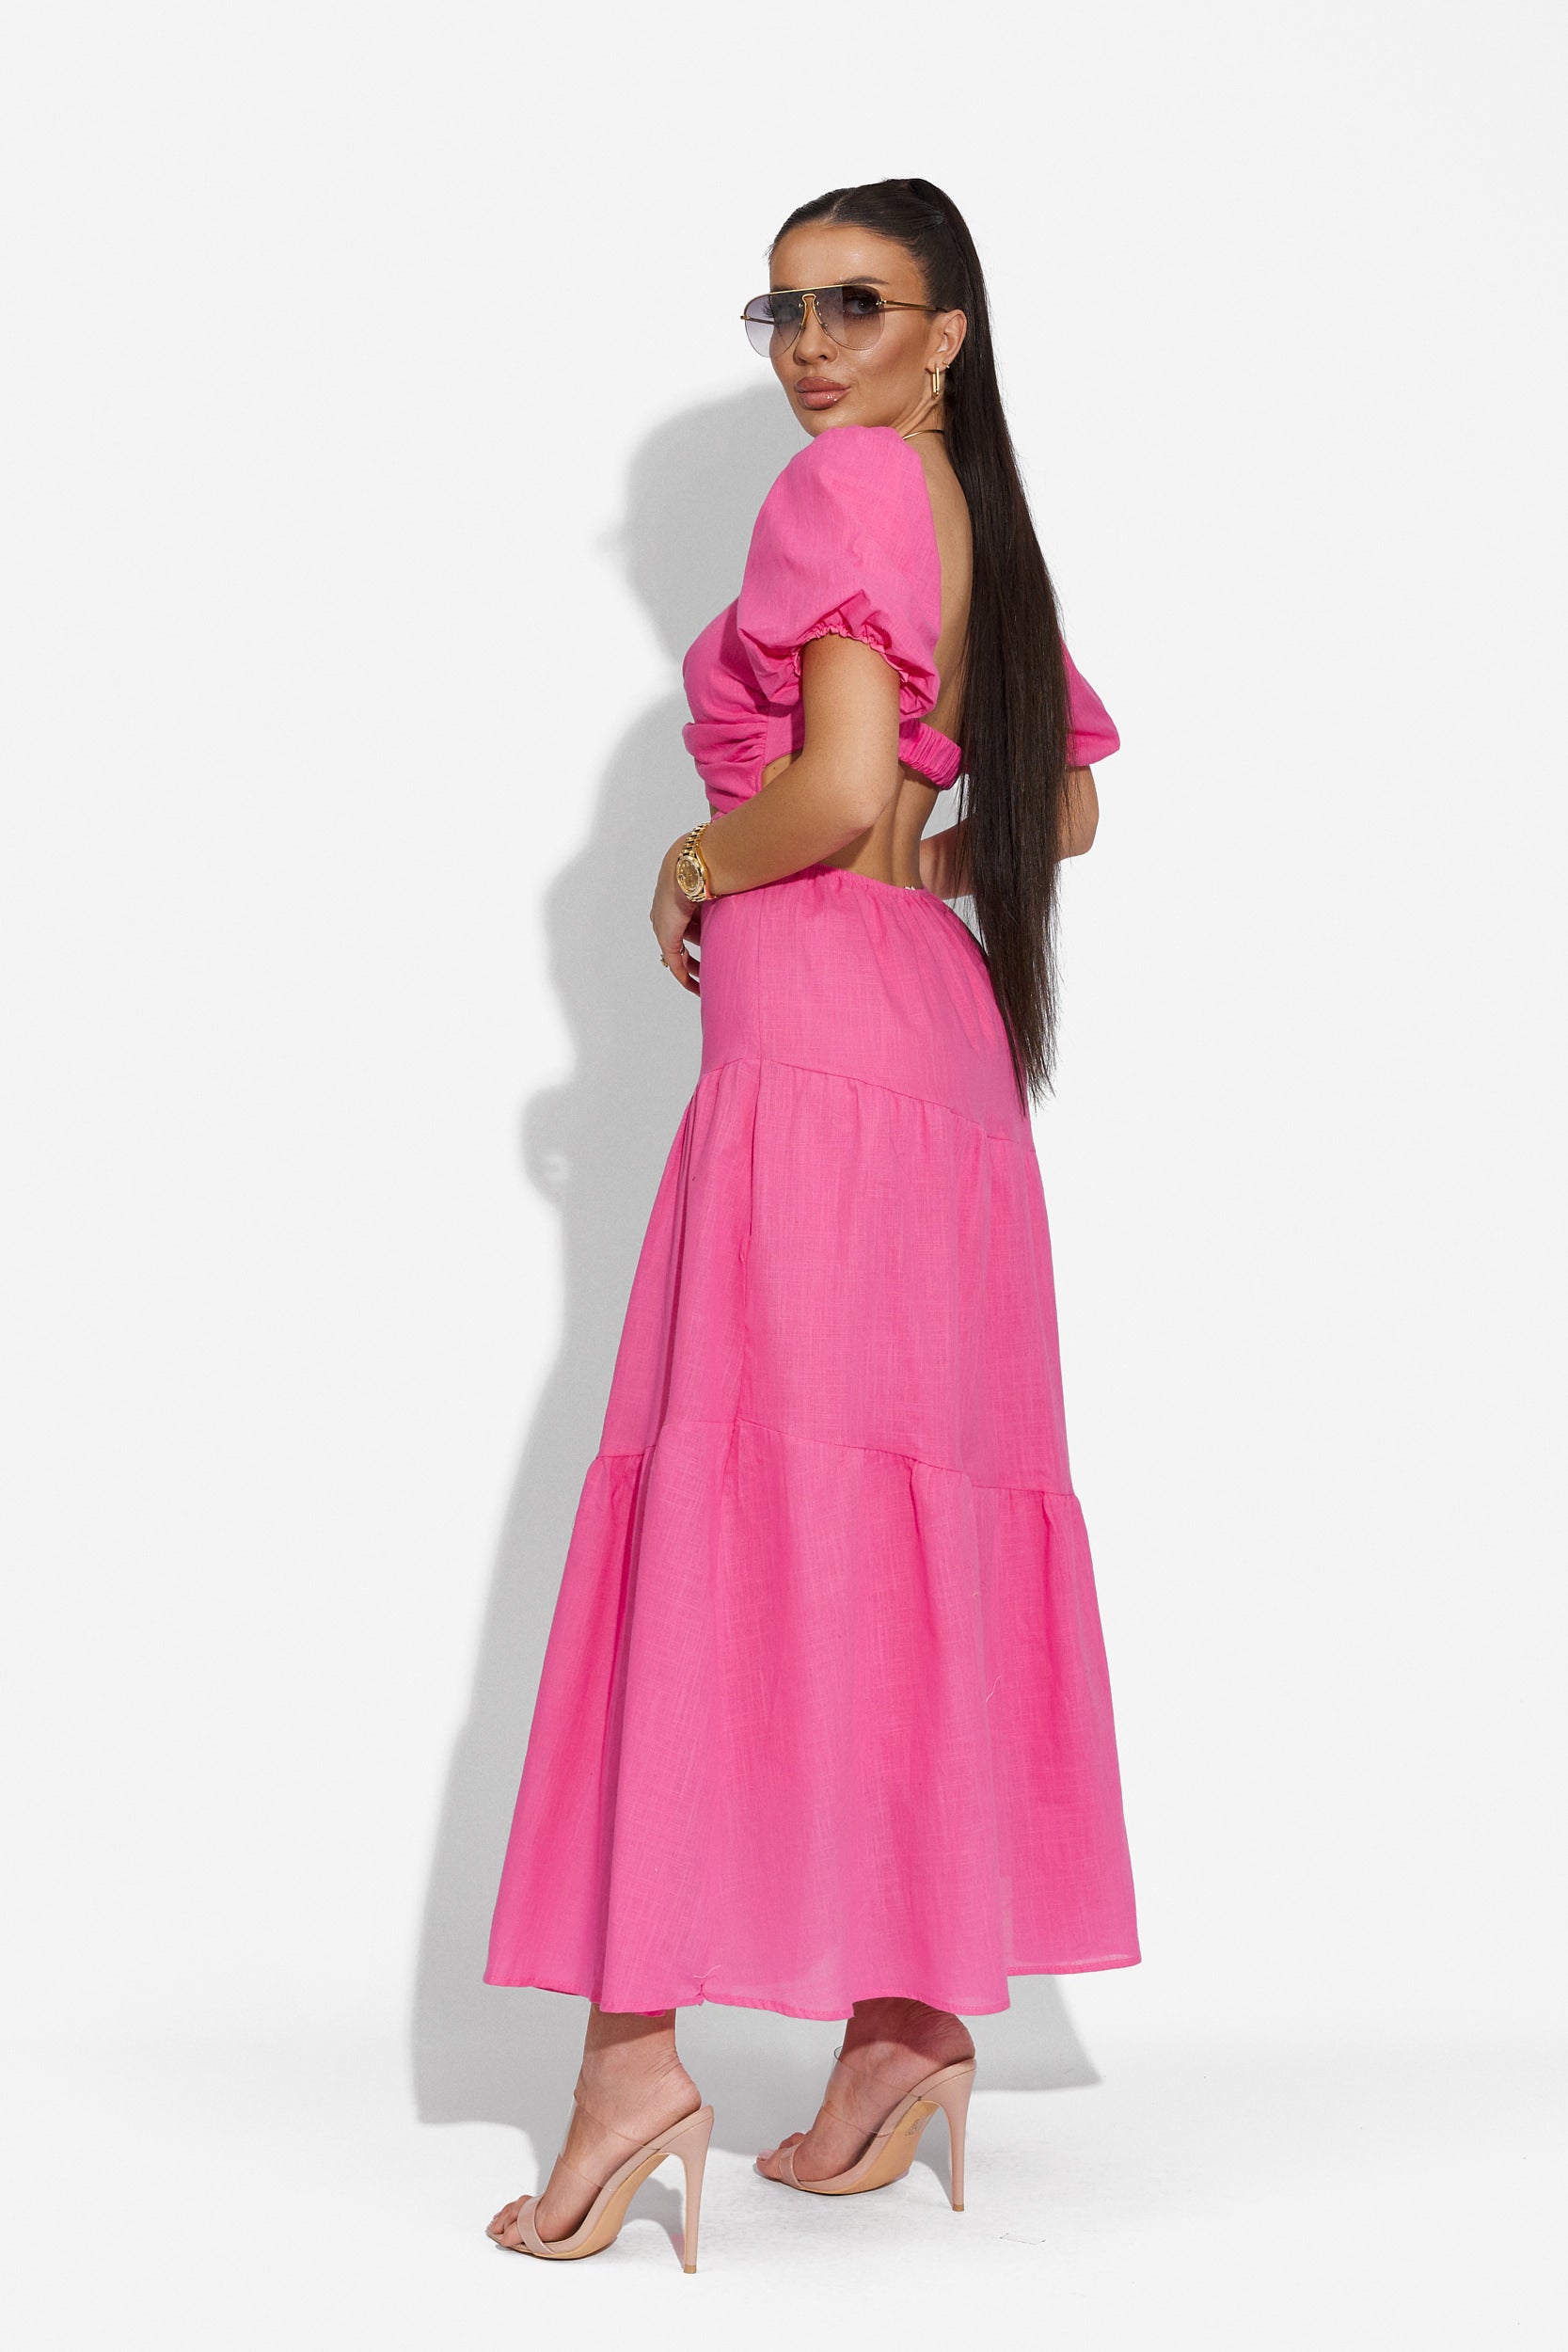 Ladies long dress pink Mosysca Bogas